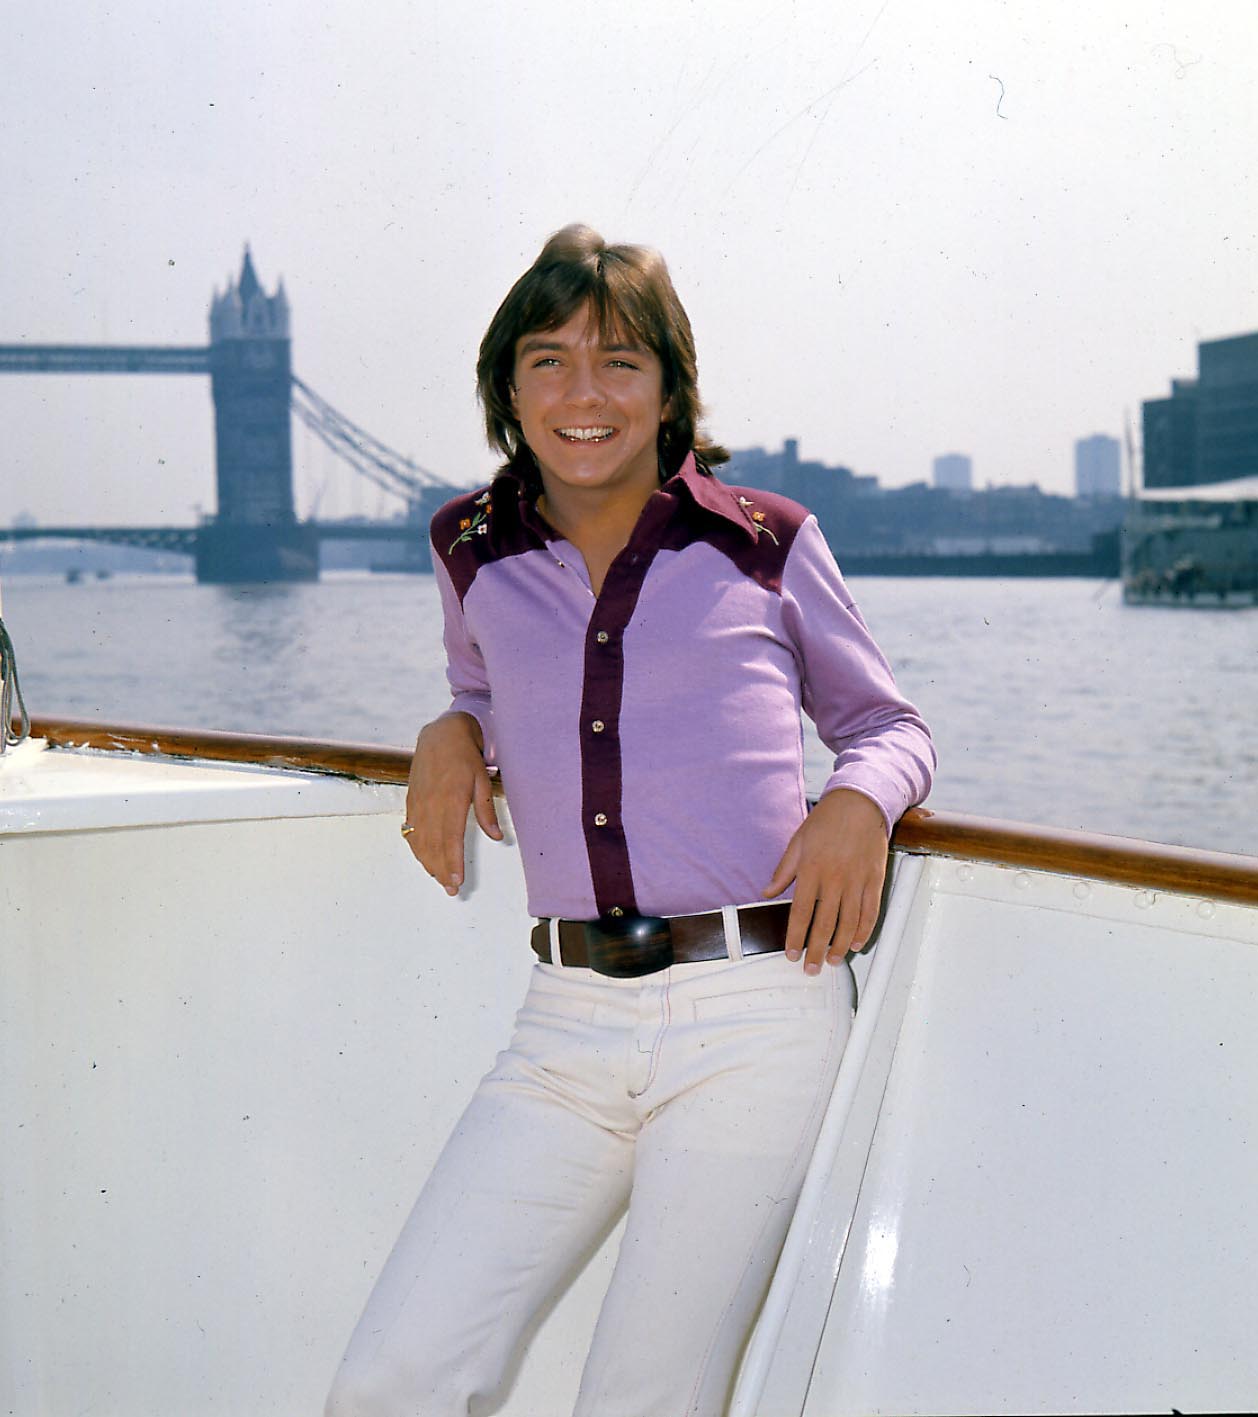 David Cassidy on September 6, 1972. | Source: Getty Images.